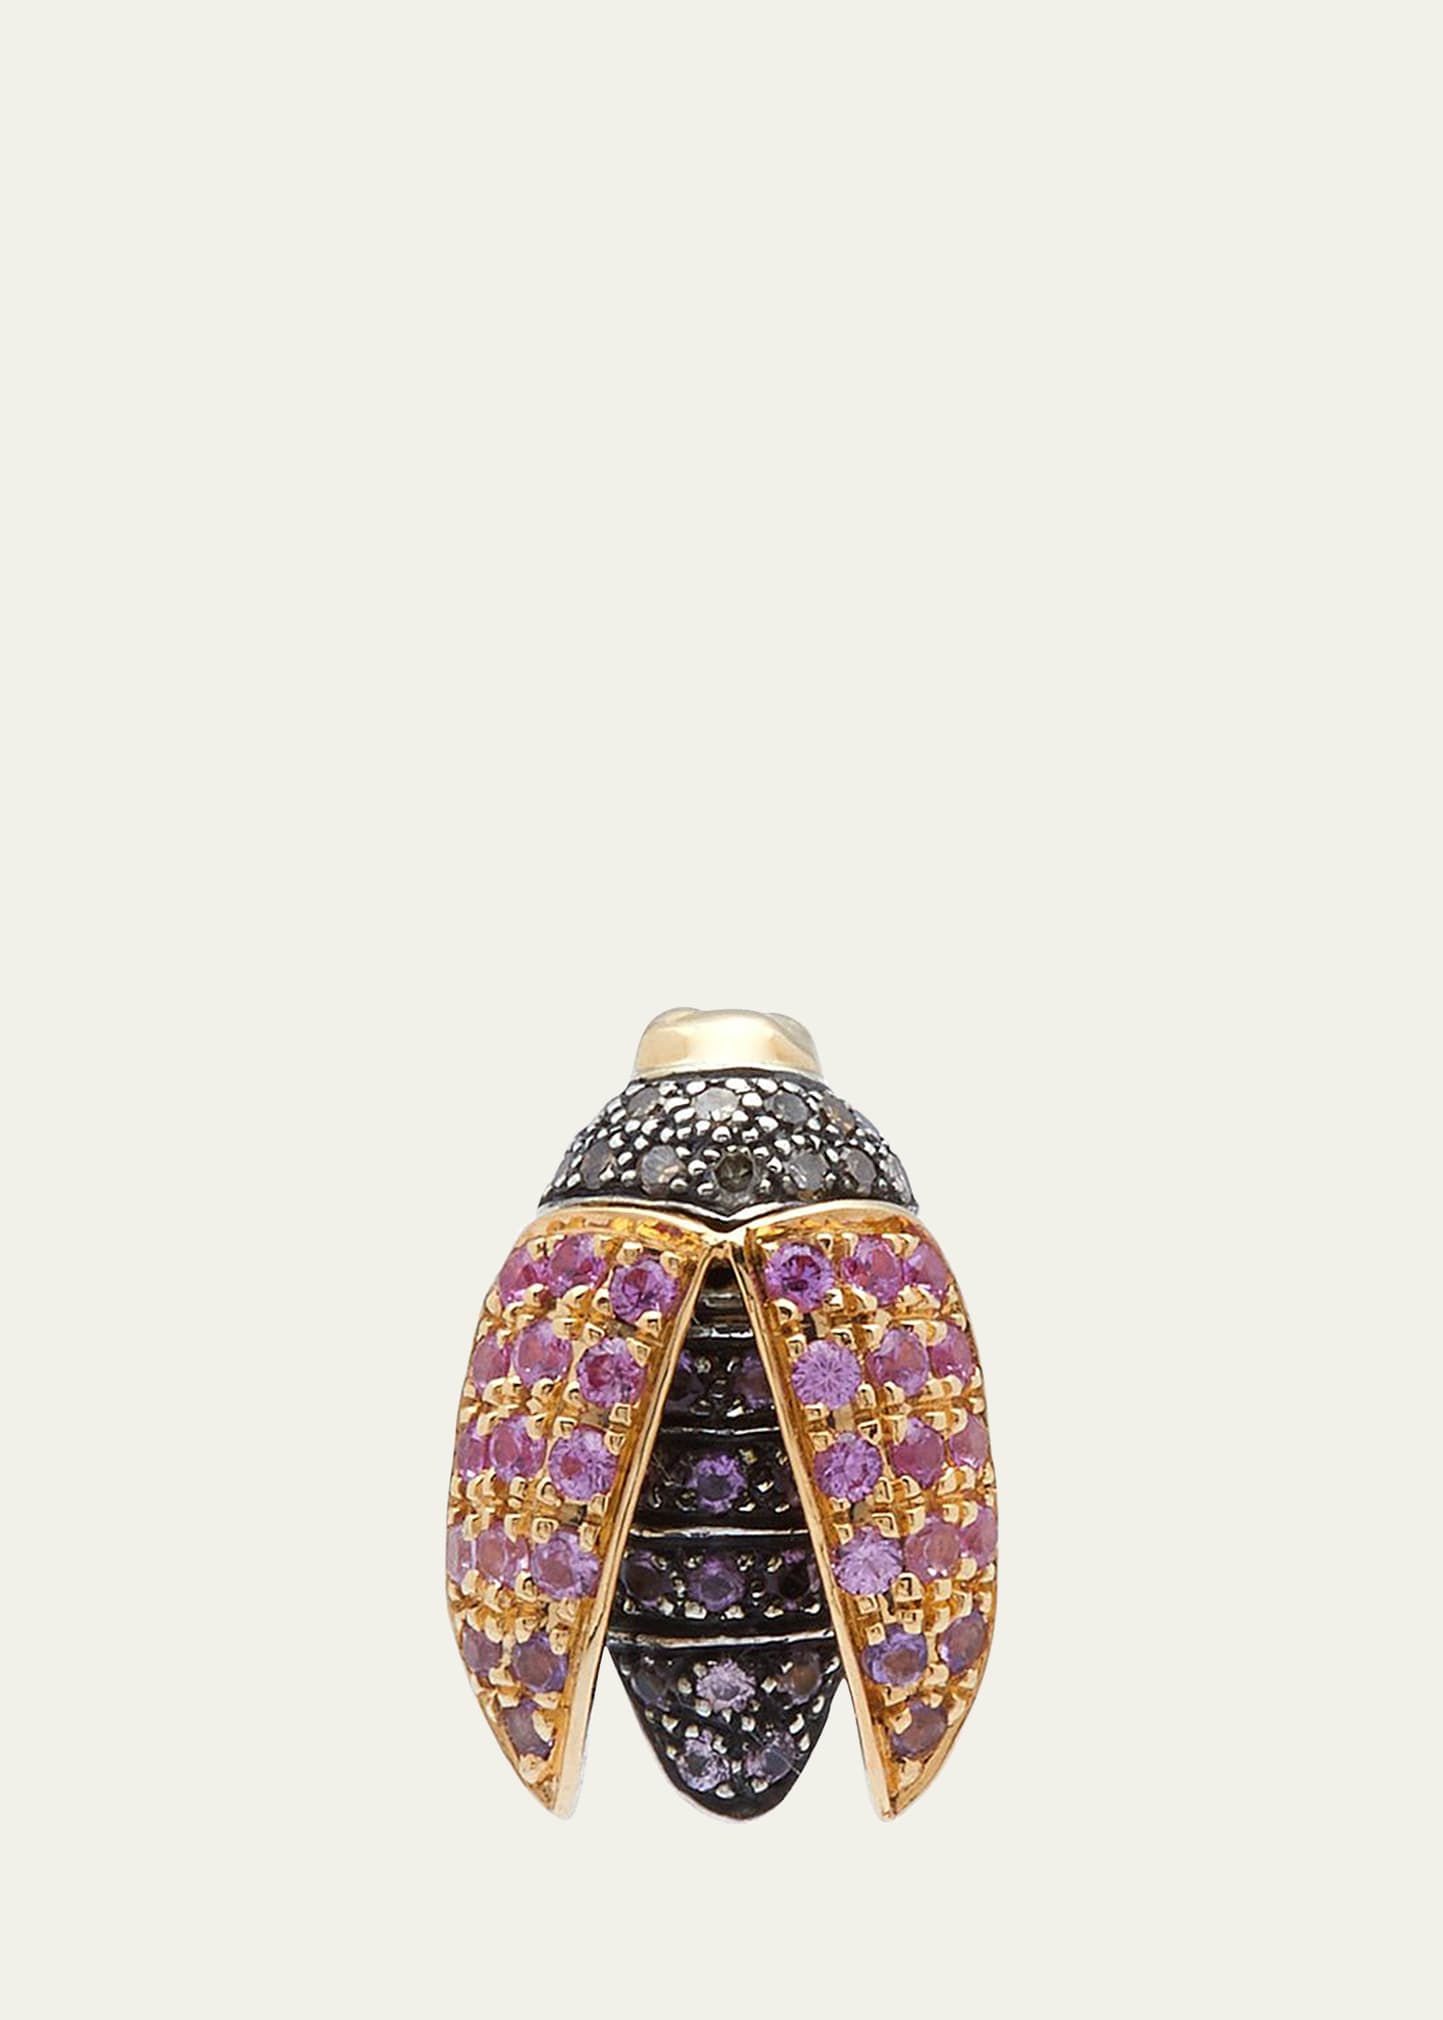 Bibi Van Der Velden 18k Yellow Gold Mini Scarab Fly Stud Earring With Pink Sapphire And Amethyst In Yg